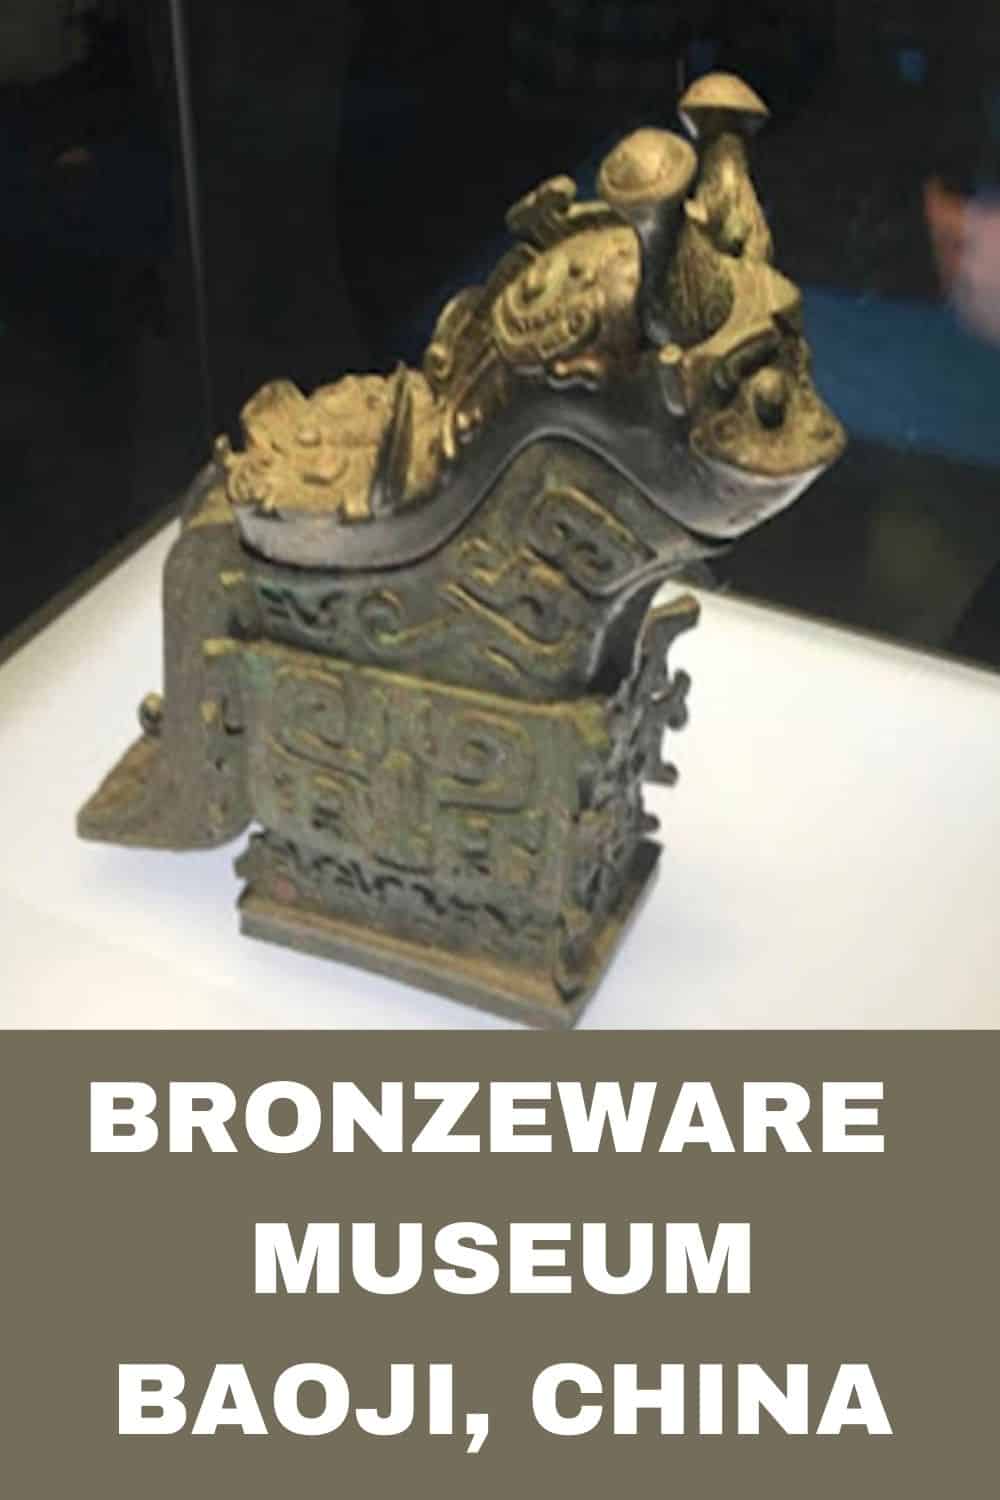 Baoji, China, a city with history, nature and sights like Mt Taibai National Forest and Baoji Bronzeware Museum full of Zhou Dynasty artifacts.